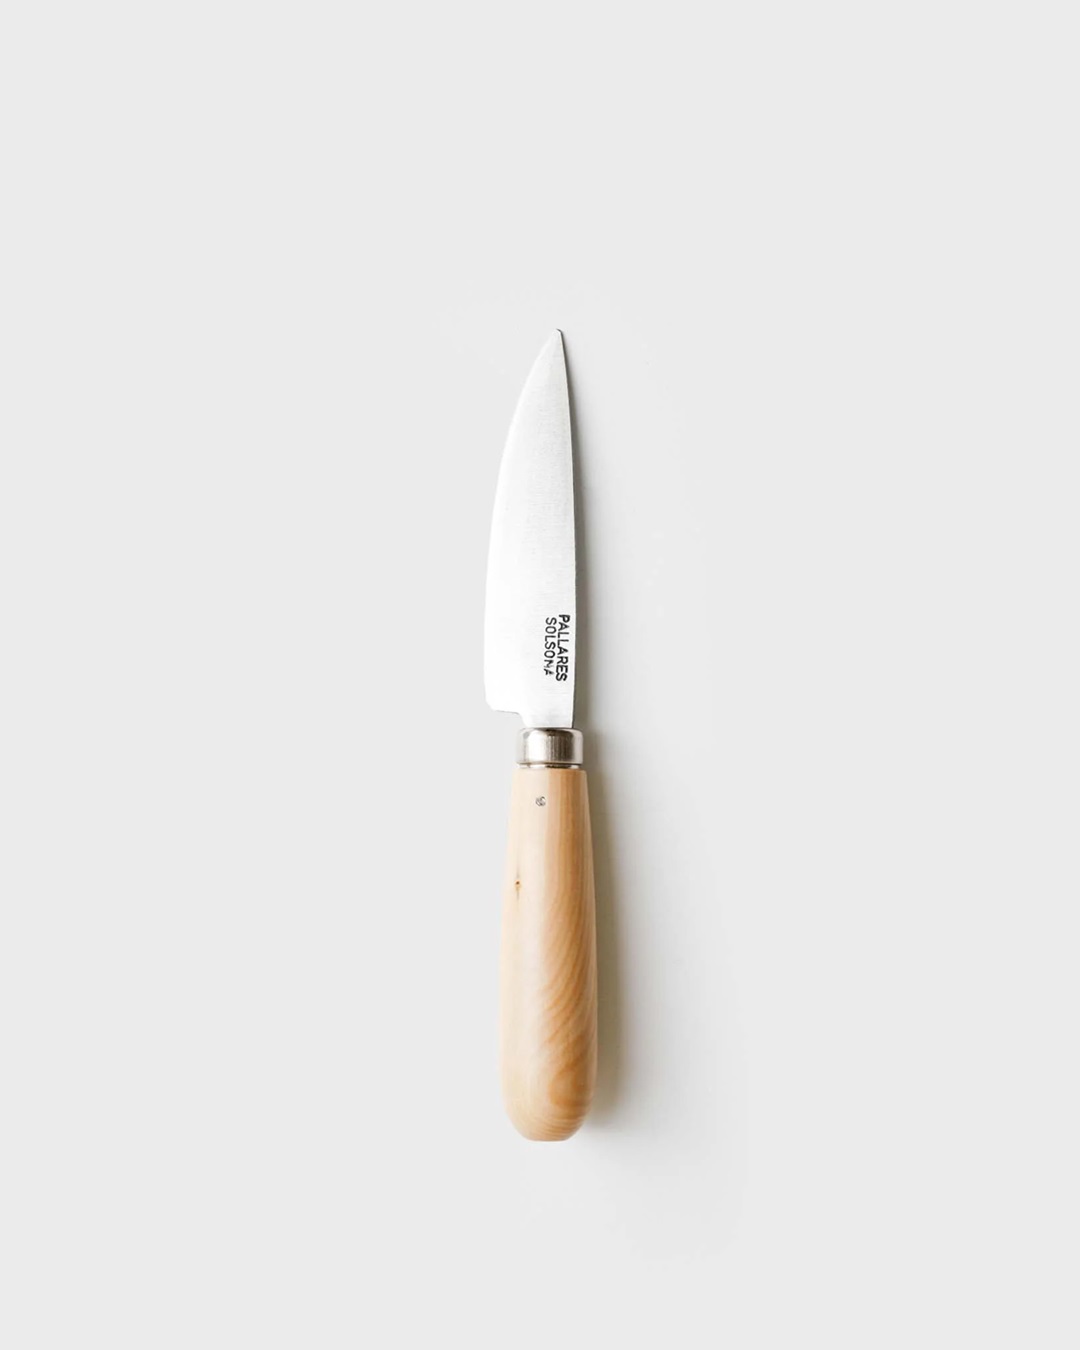 Boxwood kitchen knife with wooden handle 10cm